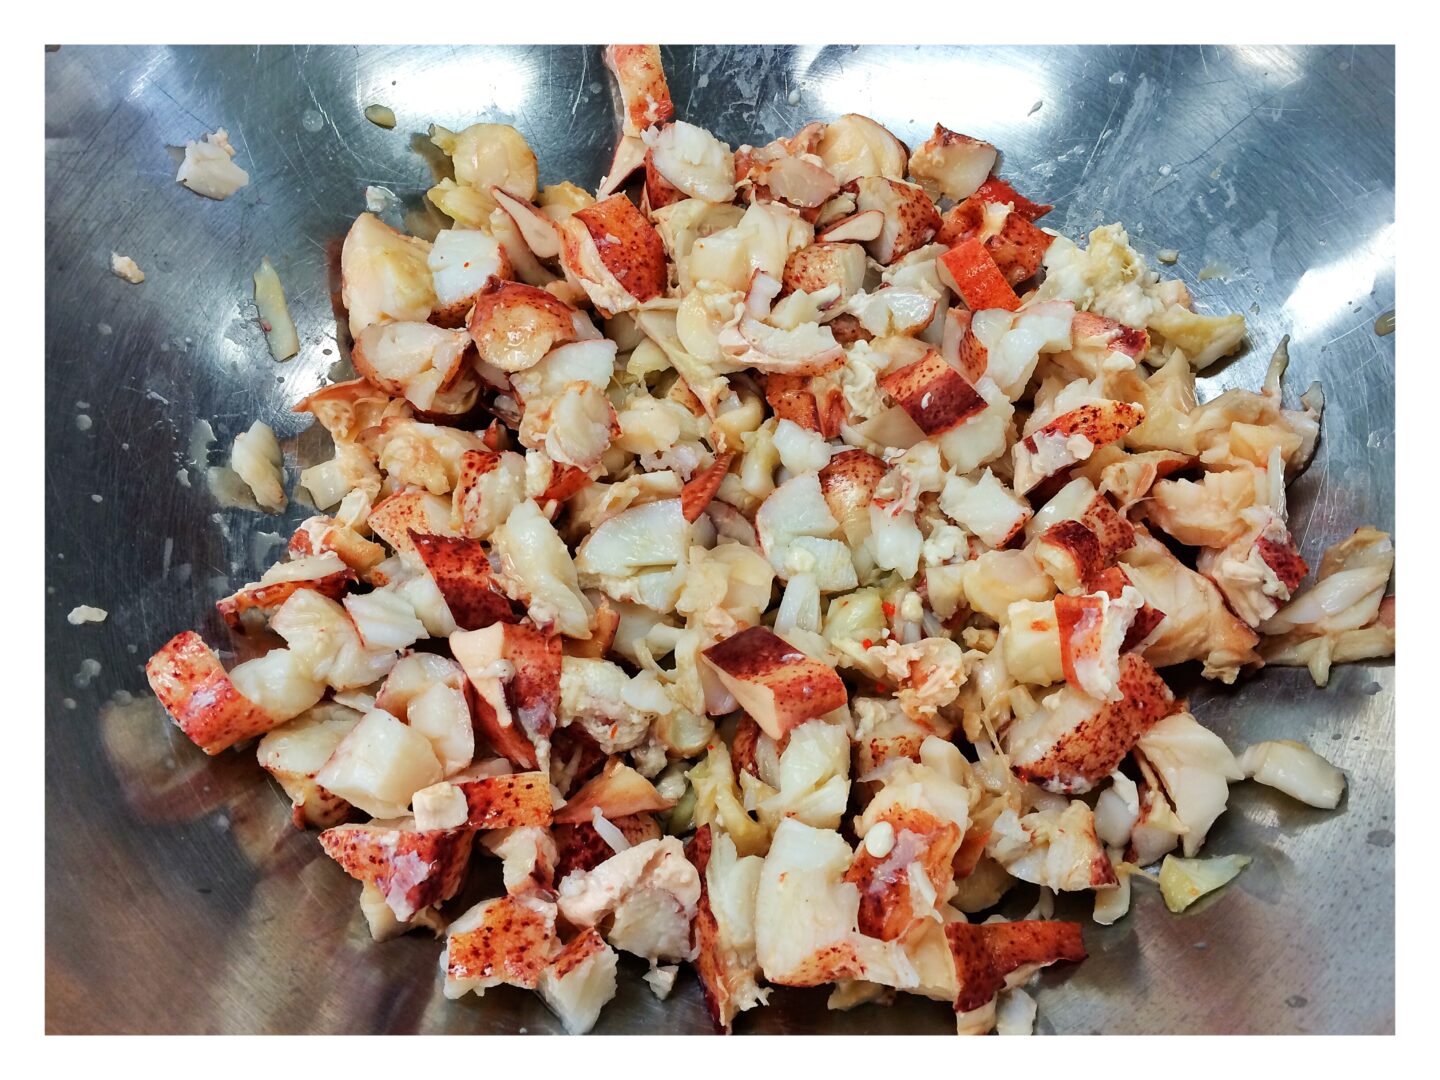 The diced lobster meat